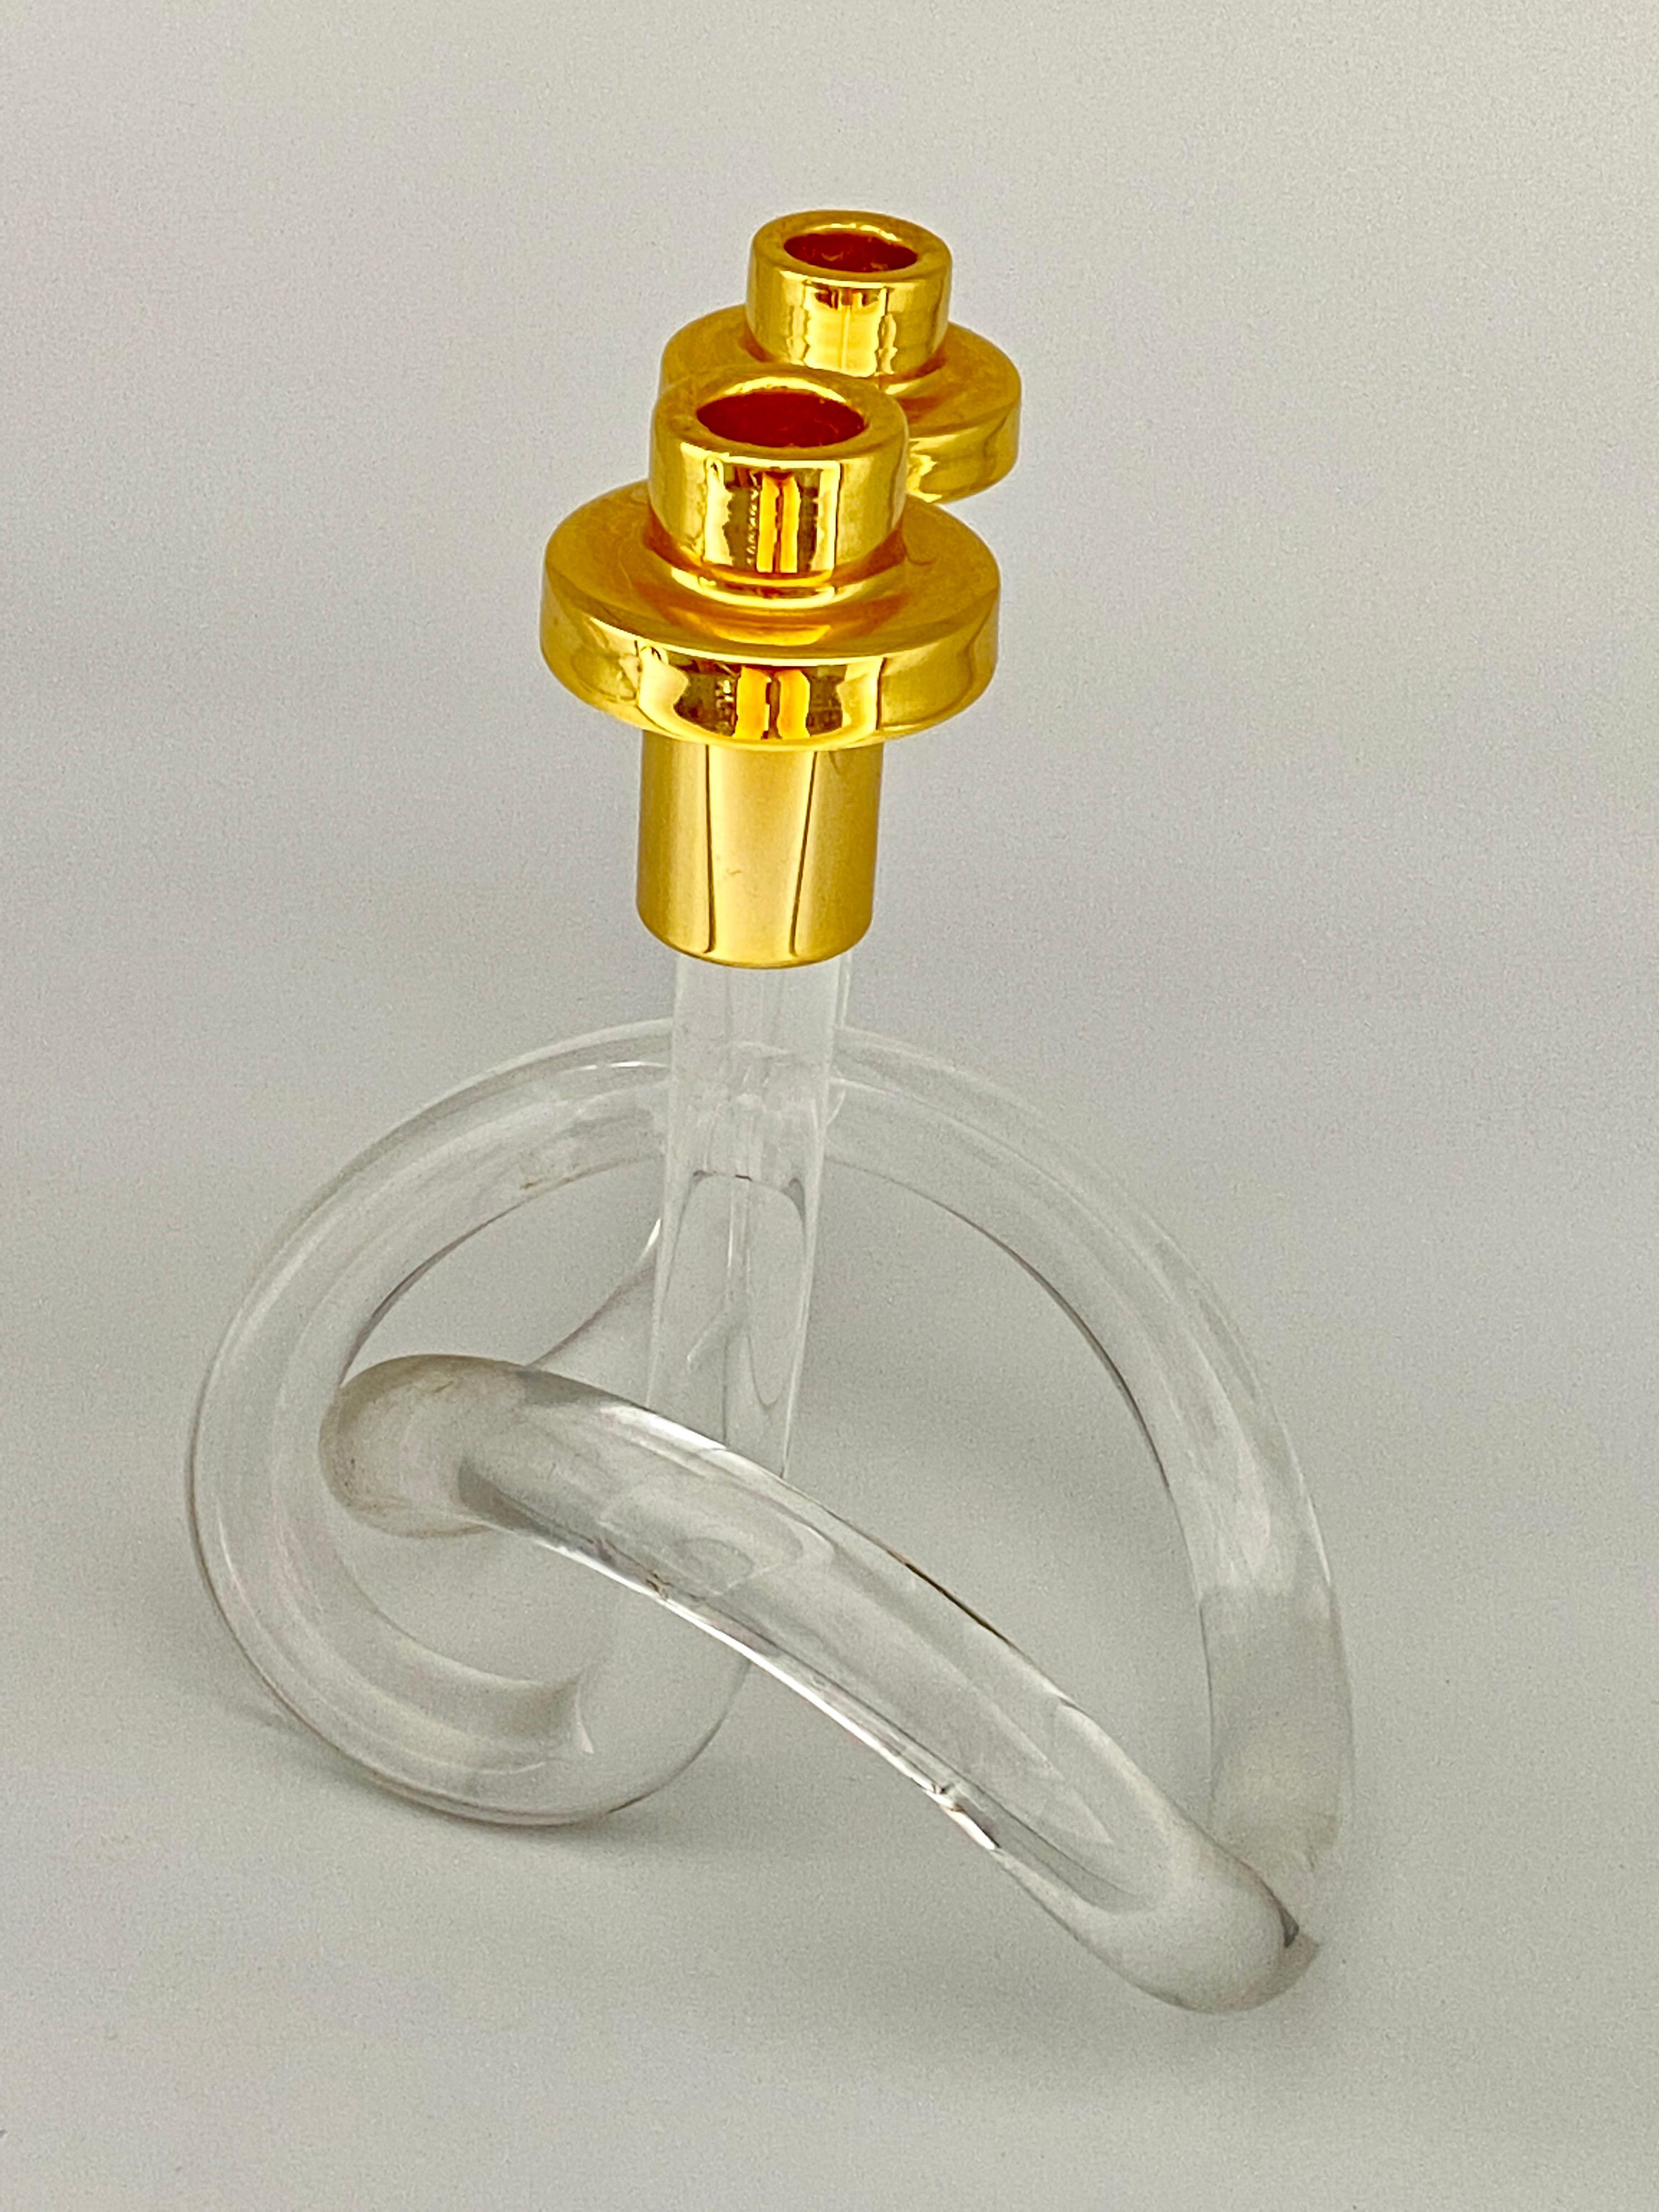 This Candlestick has been done in United States icirca 1940. It is made in Lucite and brass. Gold and transparent color. The artist is Dorothy thorpe.